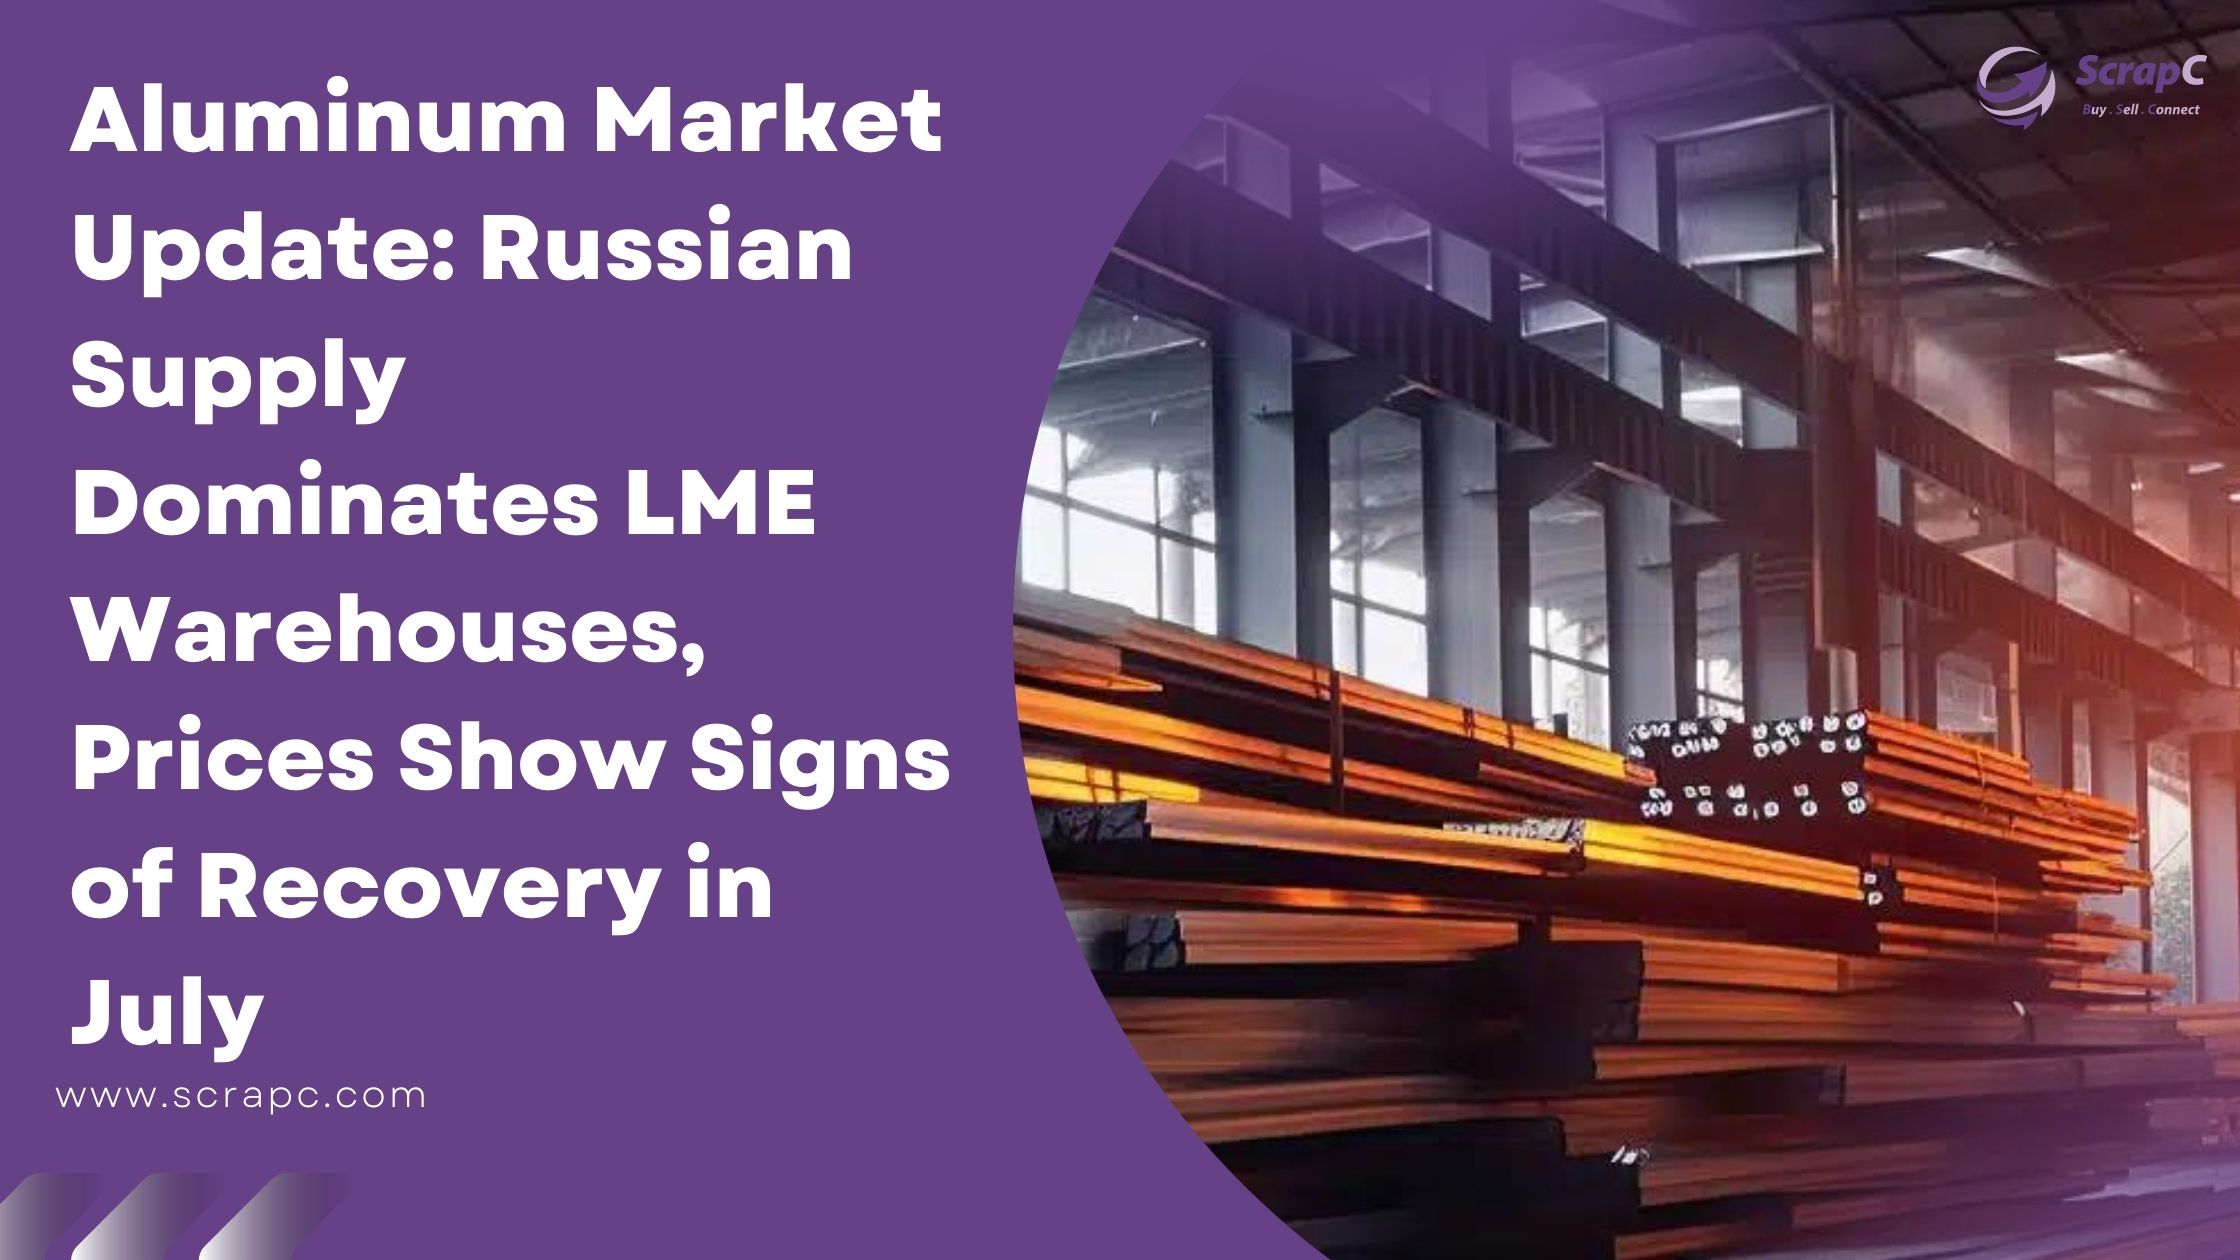 Aluminum Market Update - Russian Supply Dominates LME Warehouses, July Price Recovery